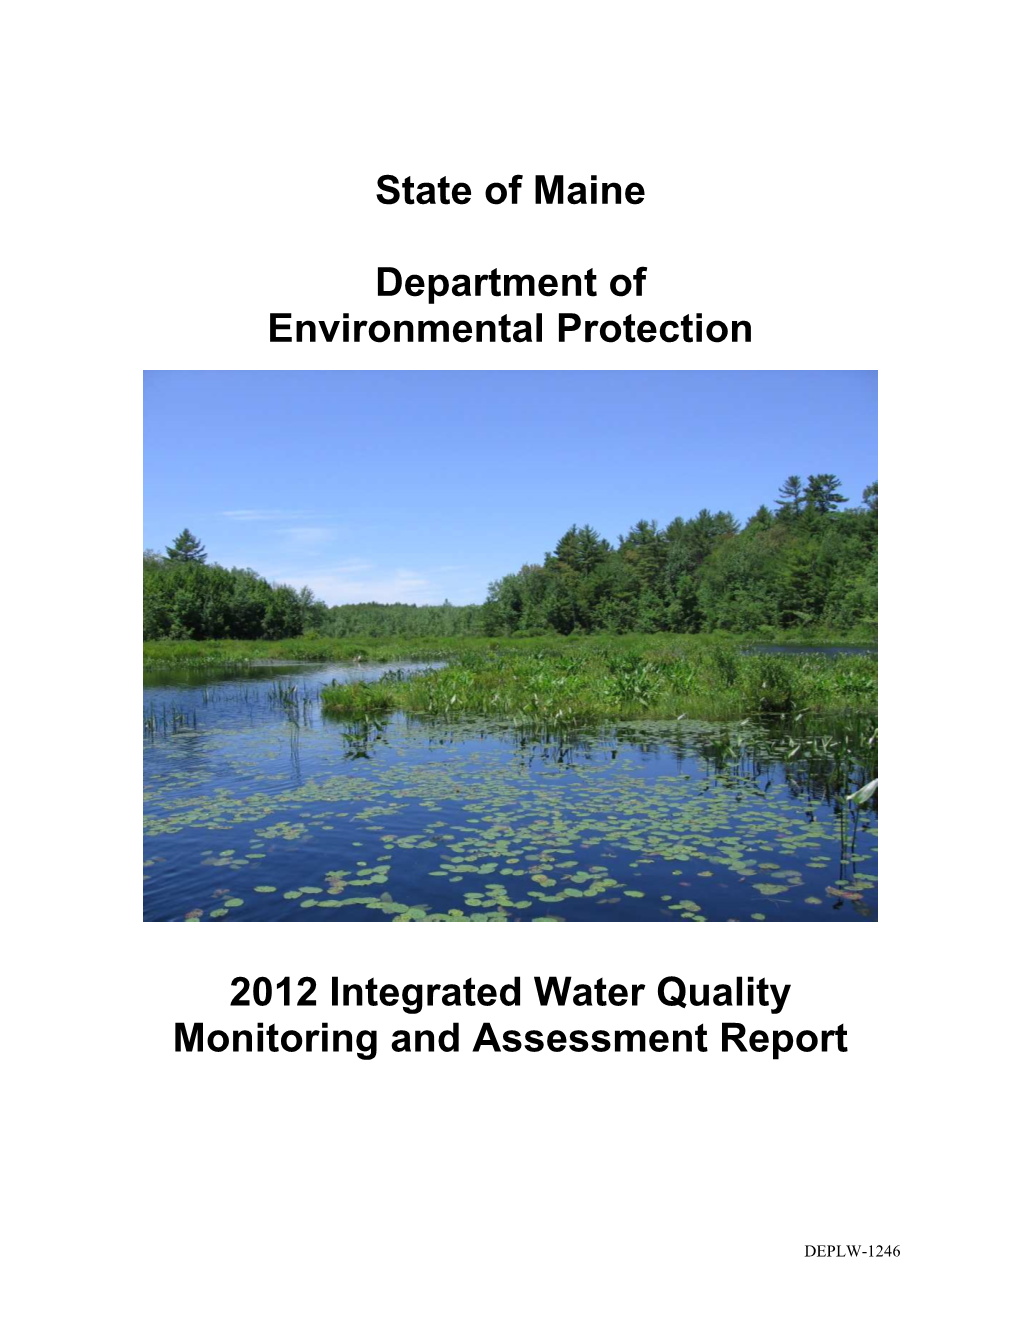 2012 Report; Therefore, Only 2012 Data Are Shown in Table 2-1 for This Waterbody Type